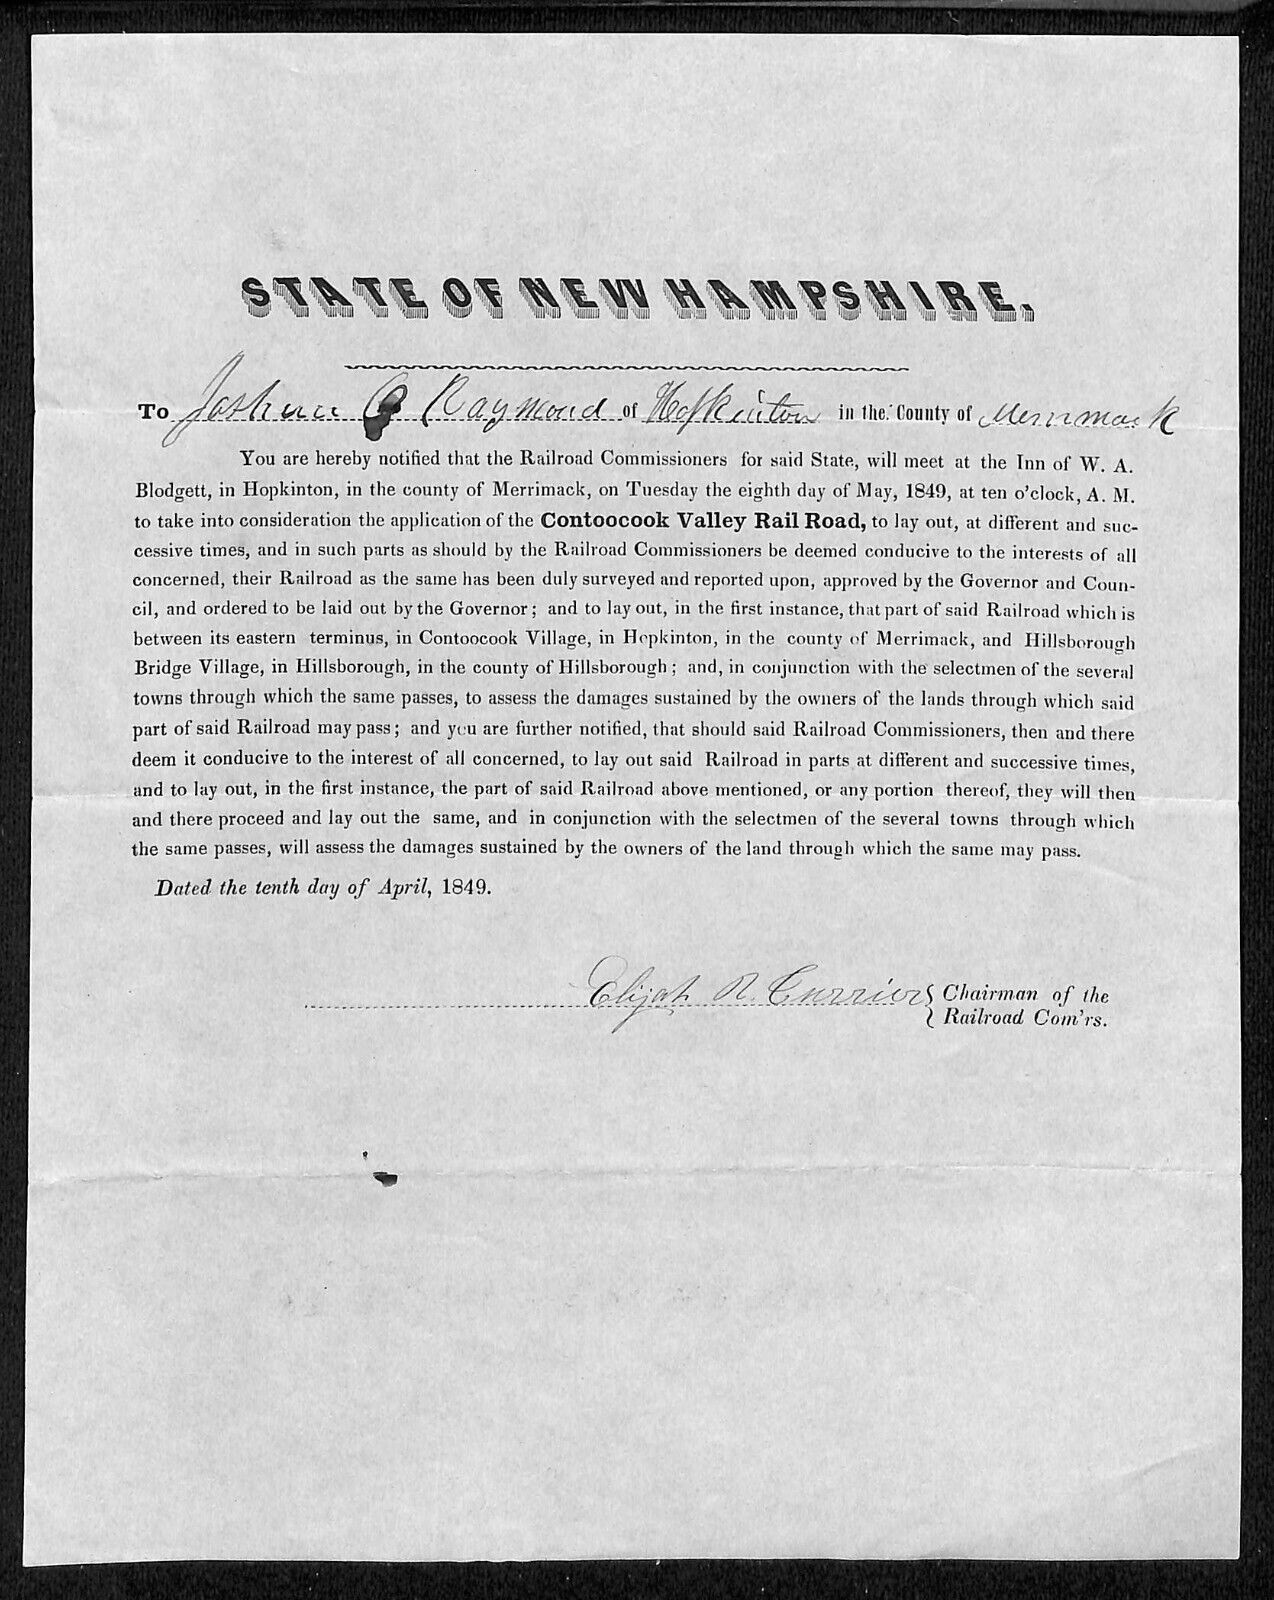 State of New Hampshire - 1849 Notice re: Contoocook Valley Railroad Proposal